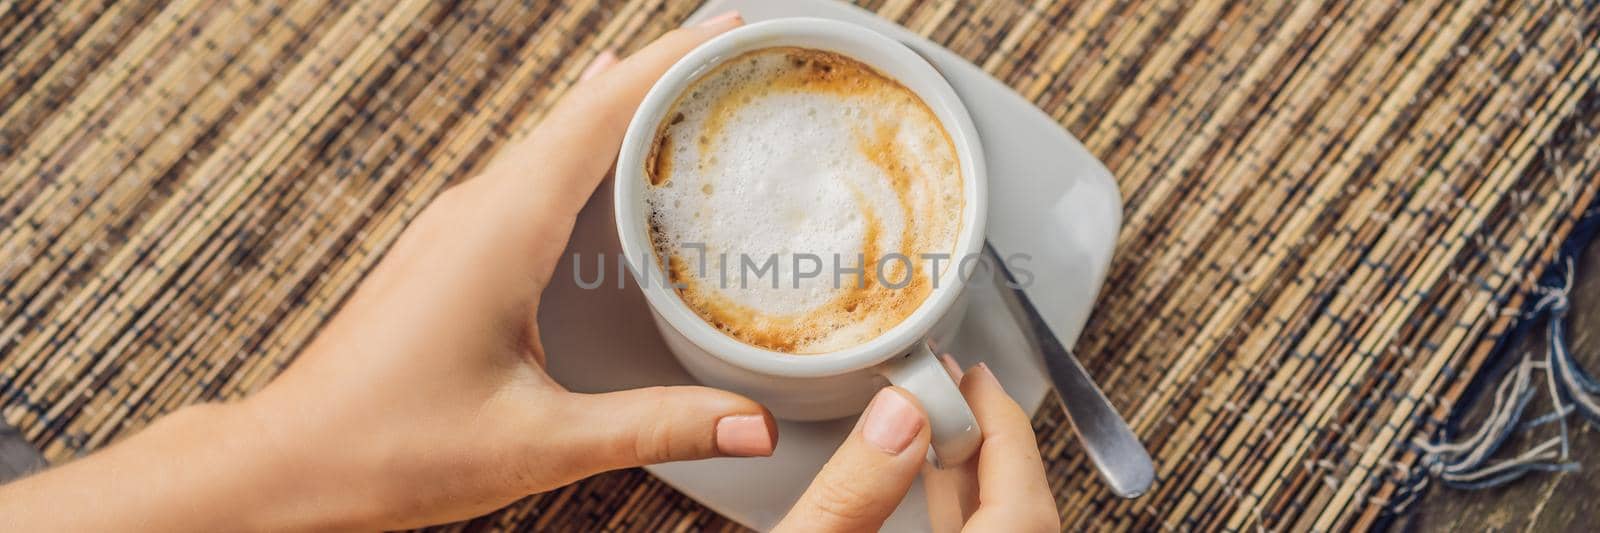 Young woman drinks coffee in a cafe in the mountains. BANNER, LONG FORMAT